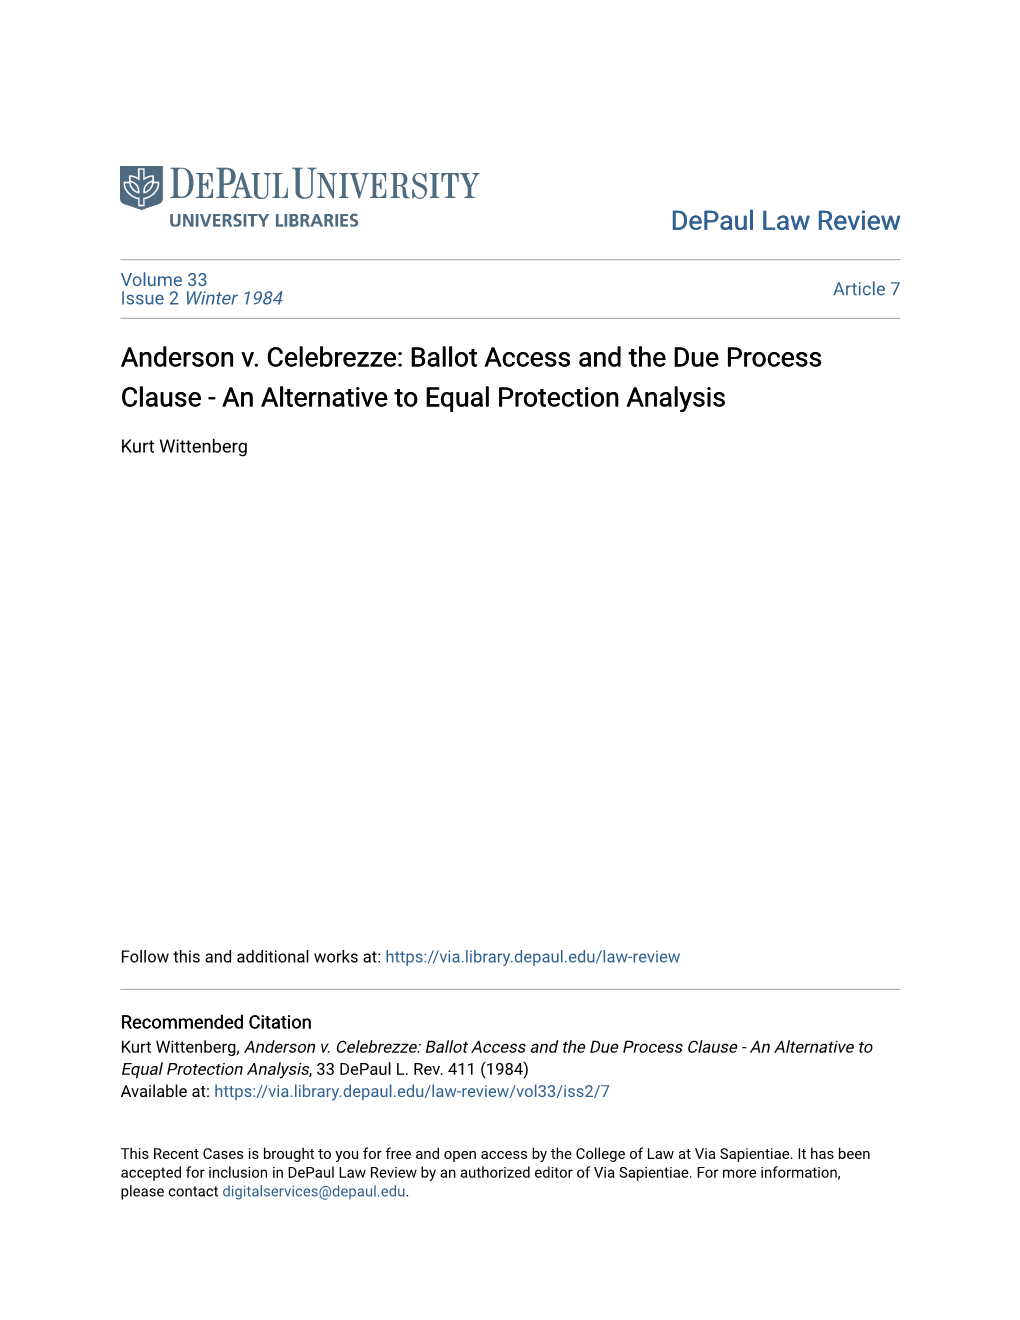 Ballot Access and the Due Process Clause - an Alternative to Equal Protection Analysis